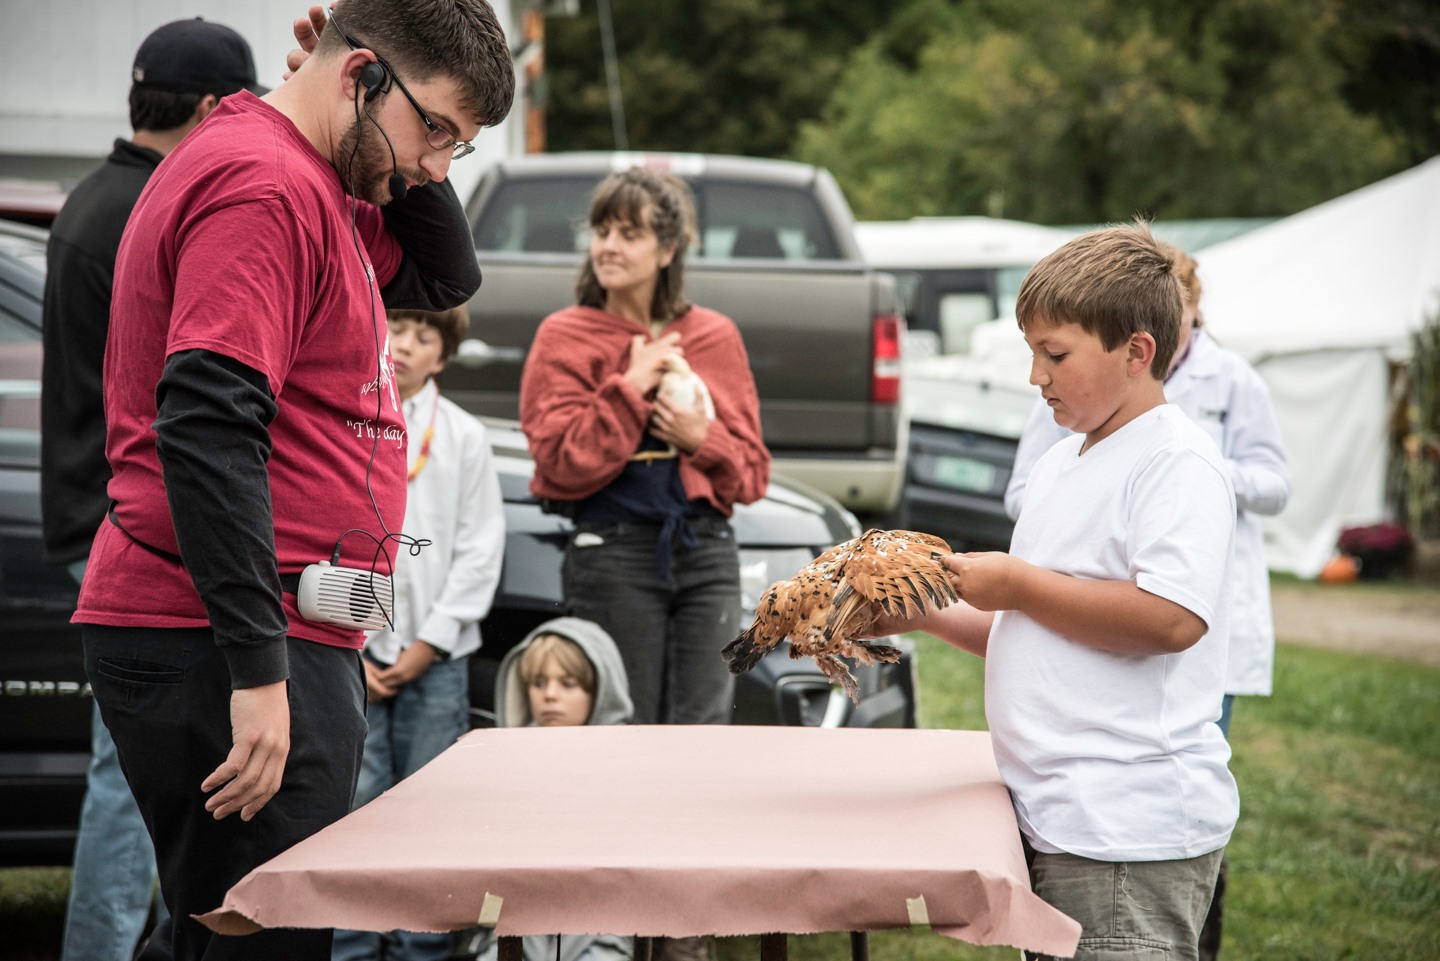 A young boy has his poultry judged at the competition